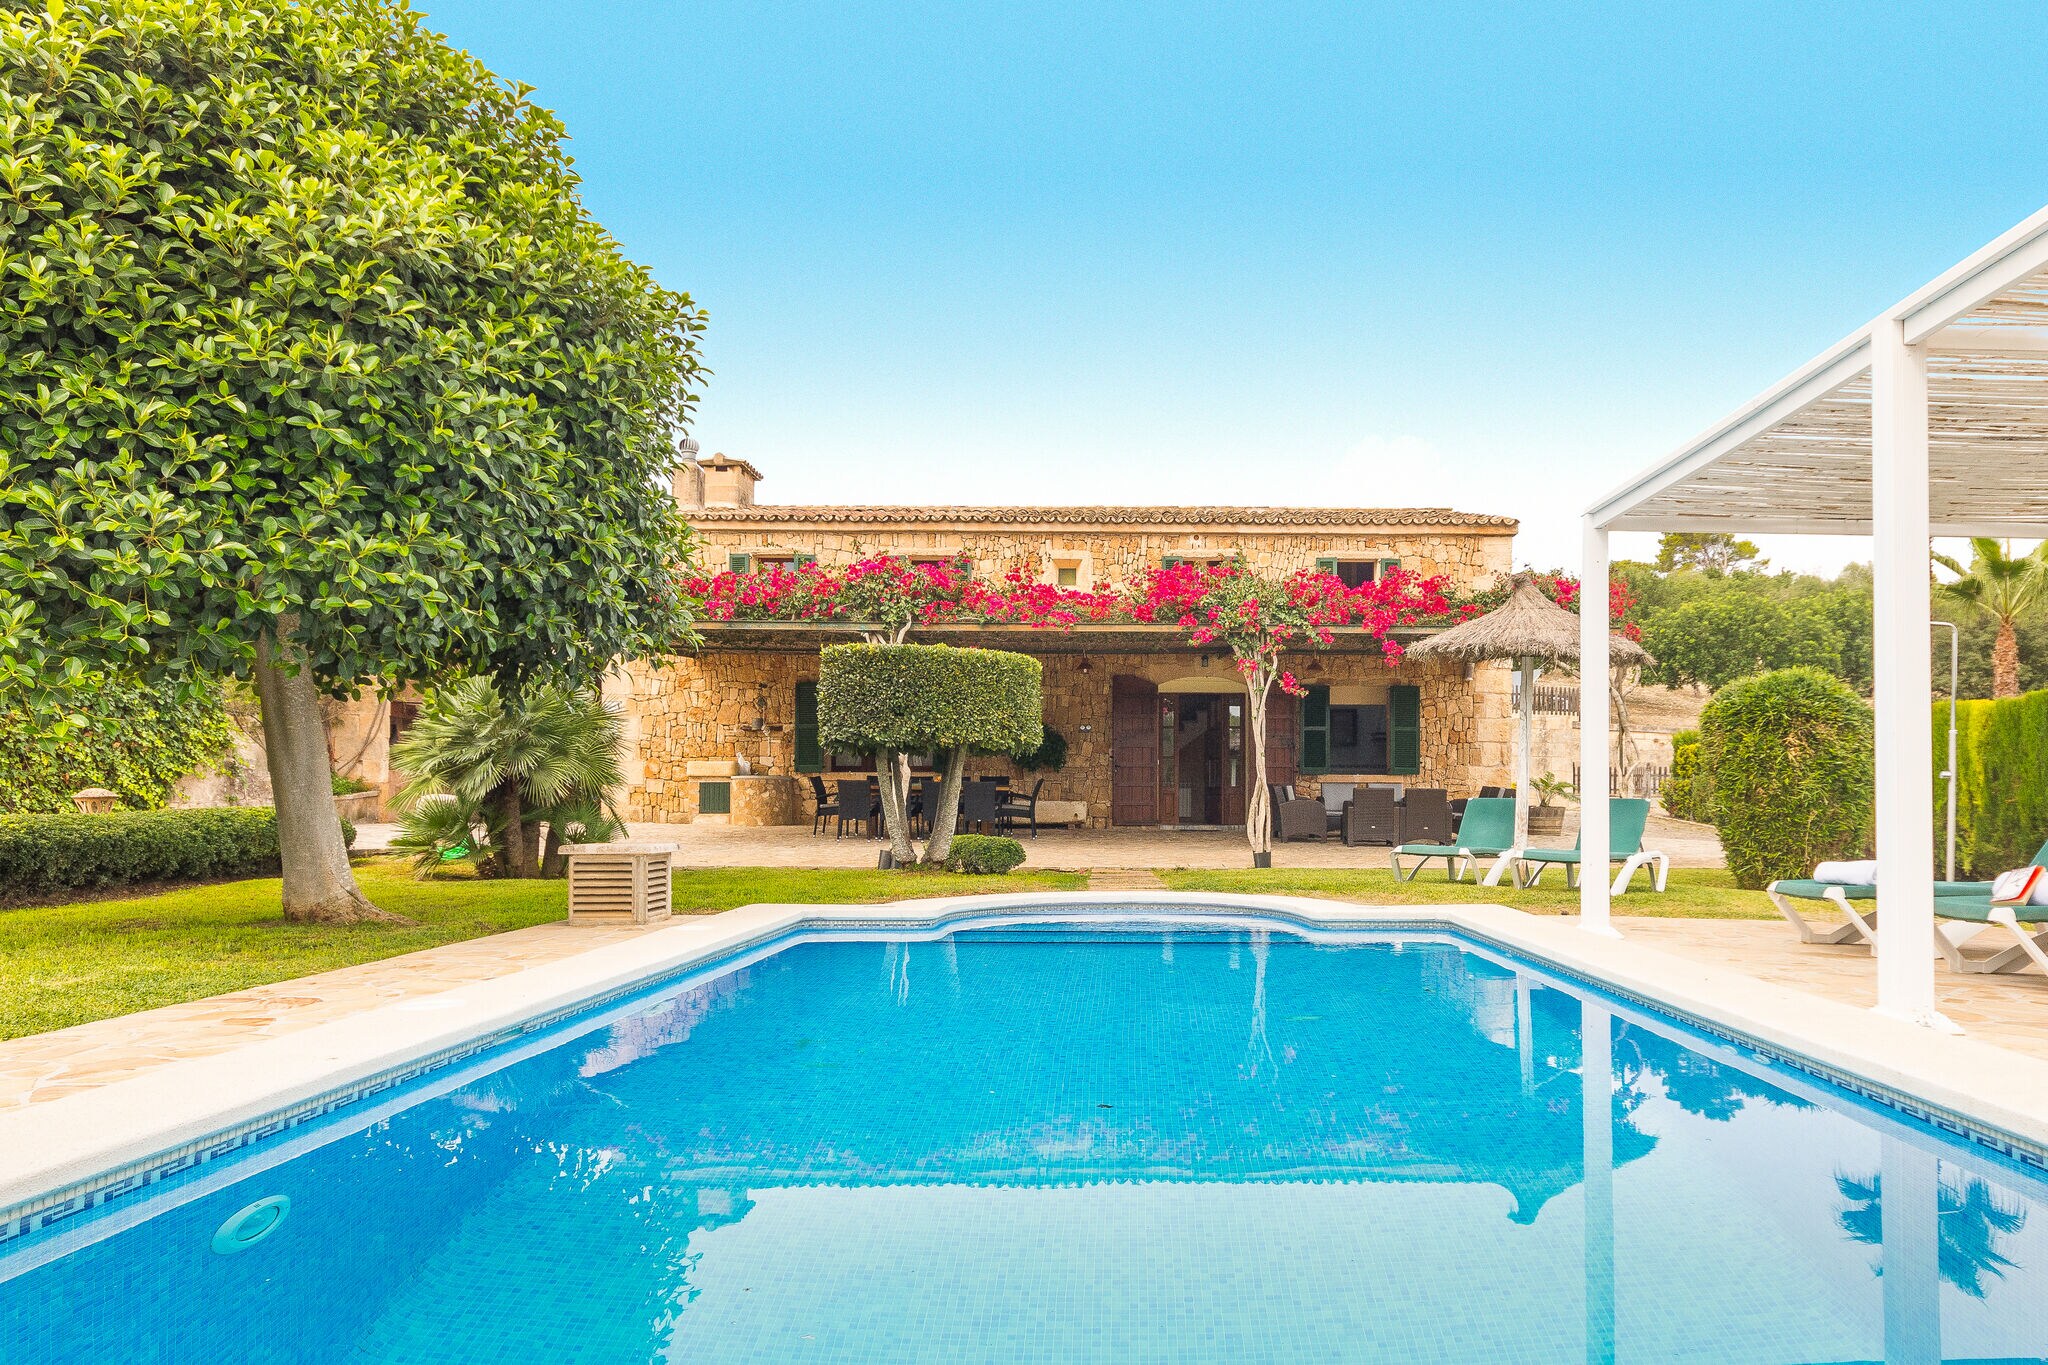 A typical Majorcan country house with private pool